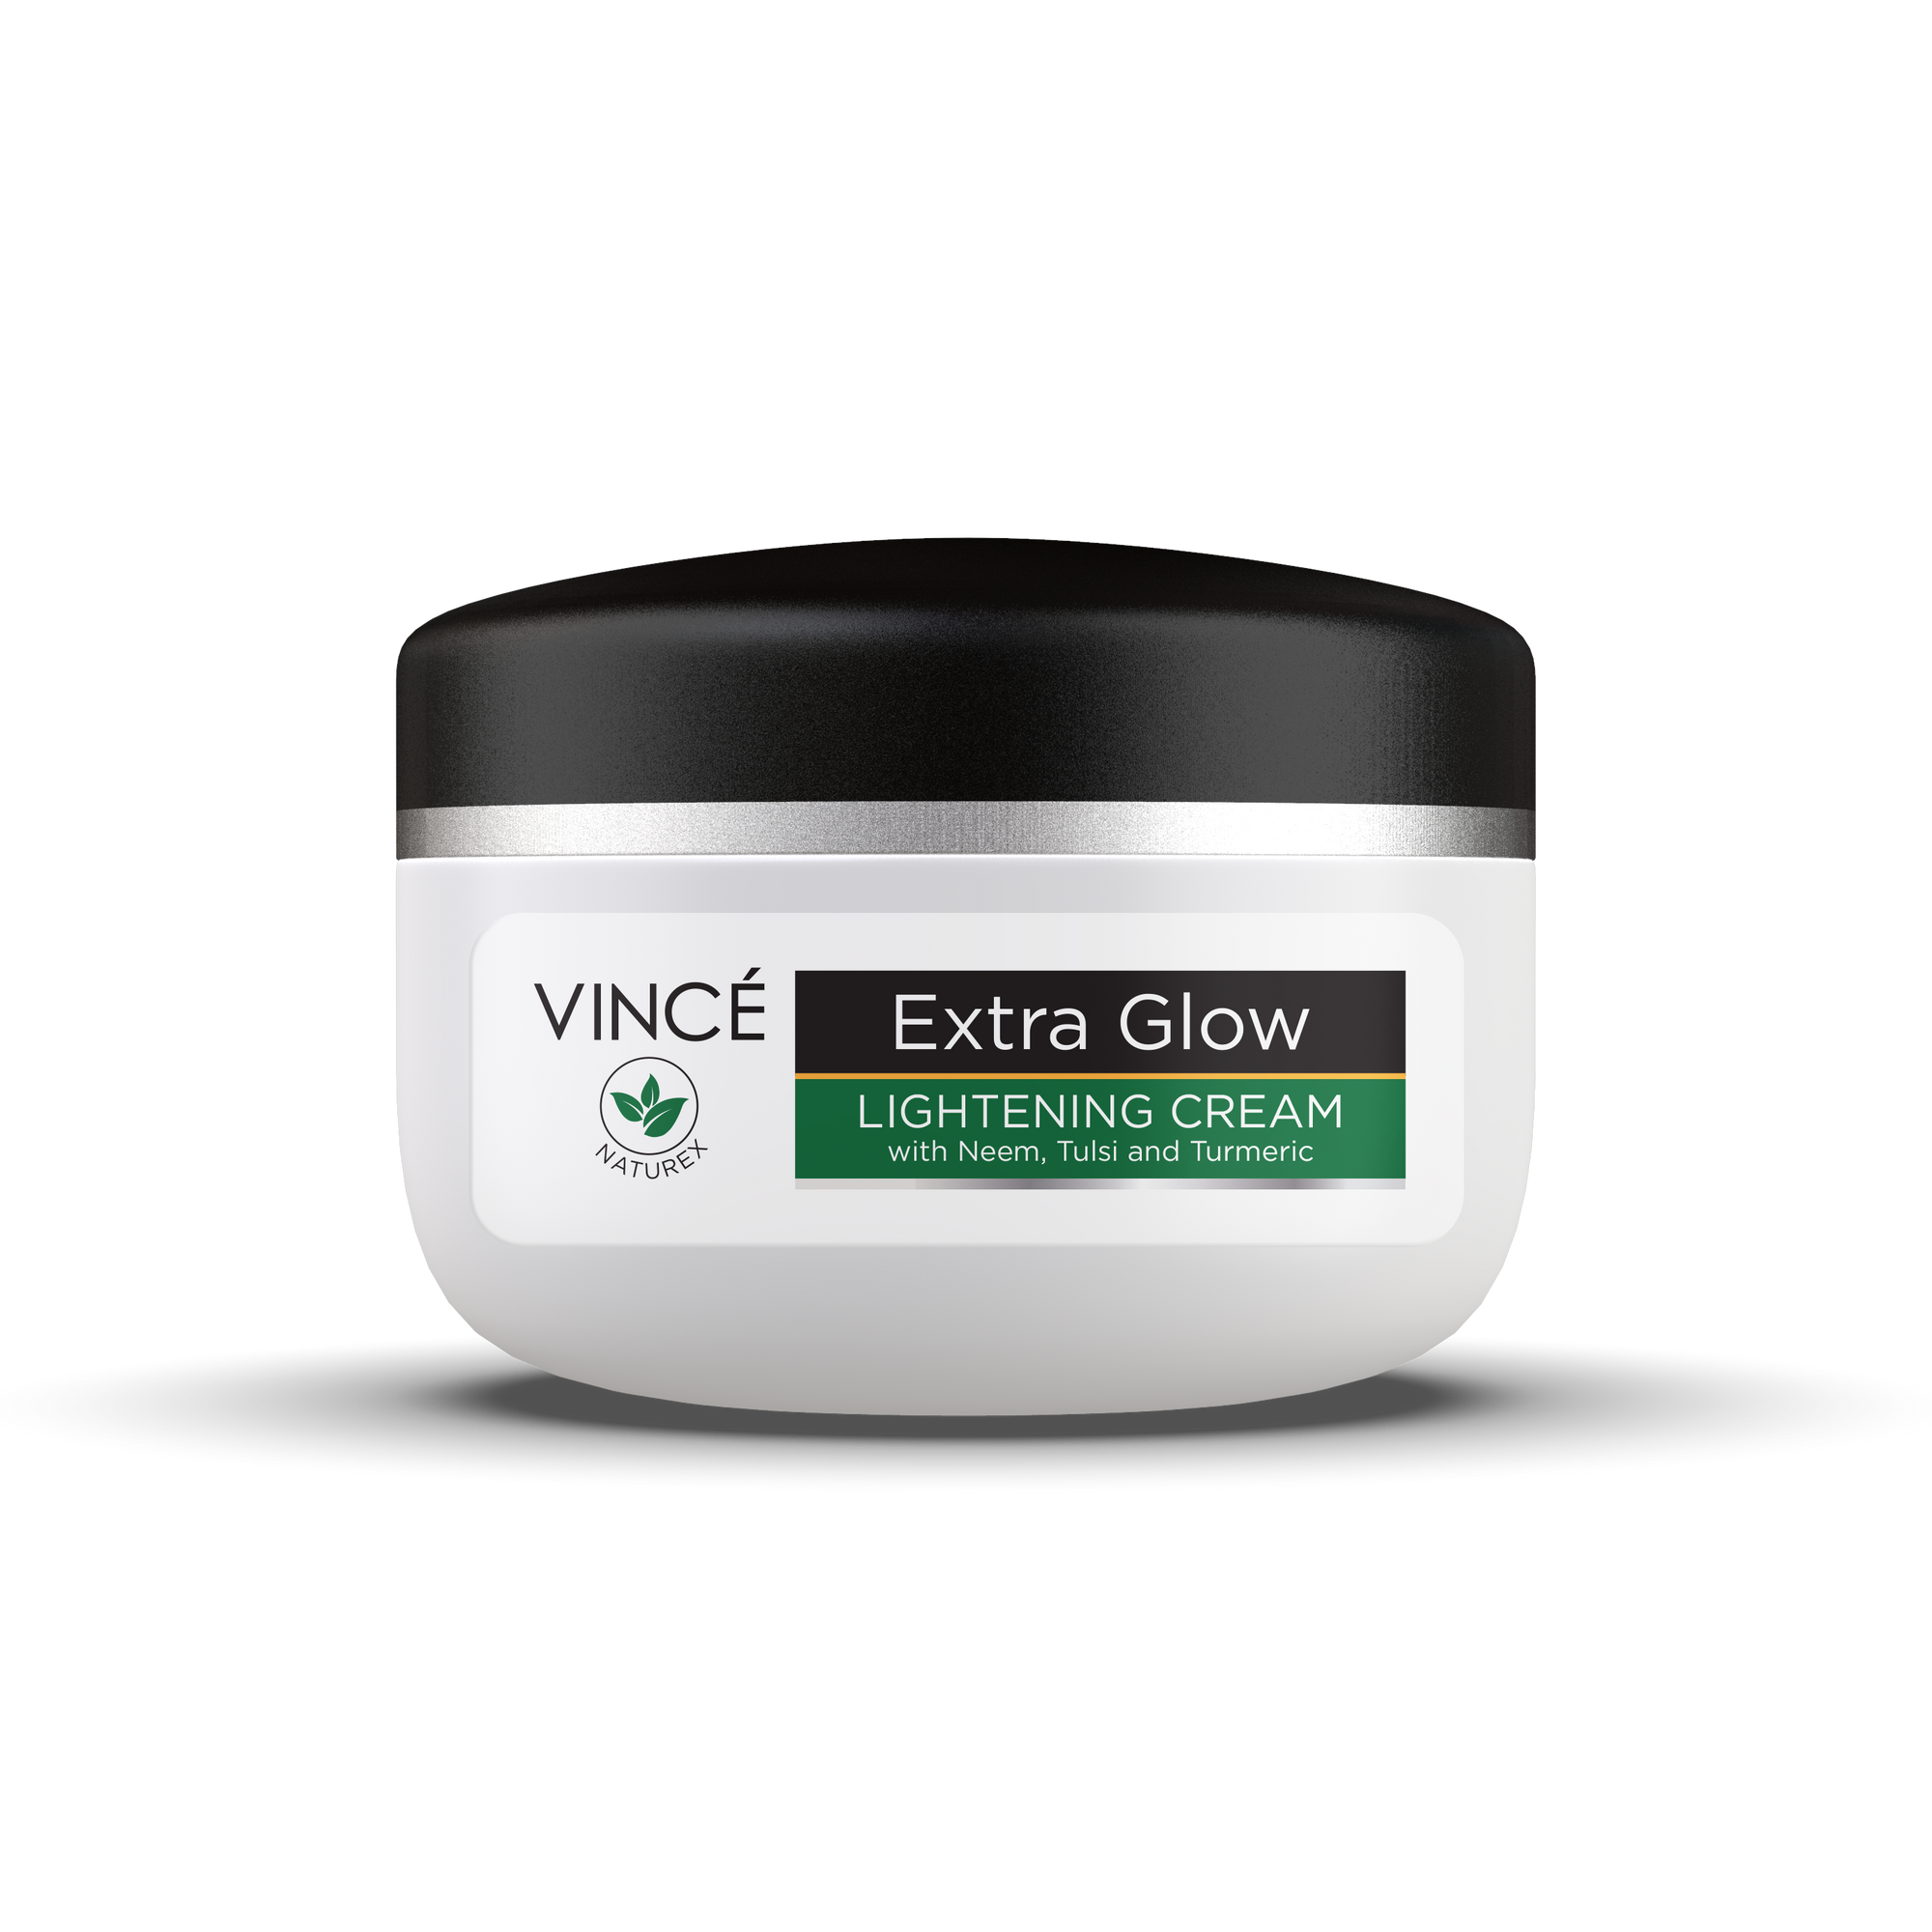 Buy  Vince Extra Glow Lightening Cream with Neem, Tulsi and Turmeric - at Best Price Online in Pakistan